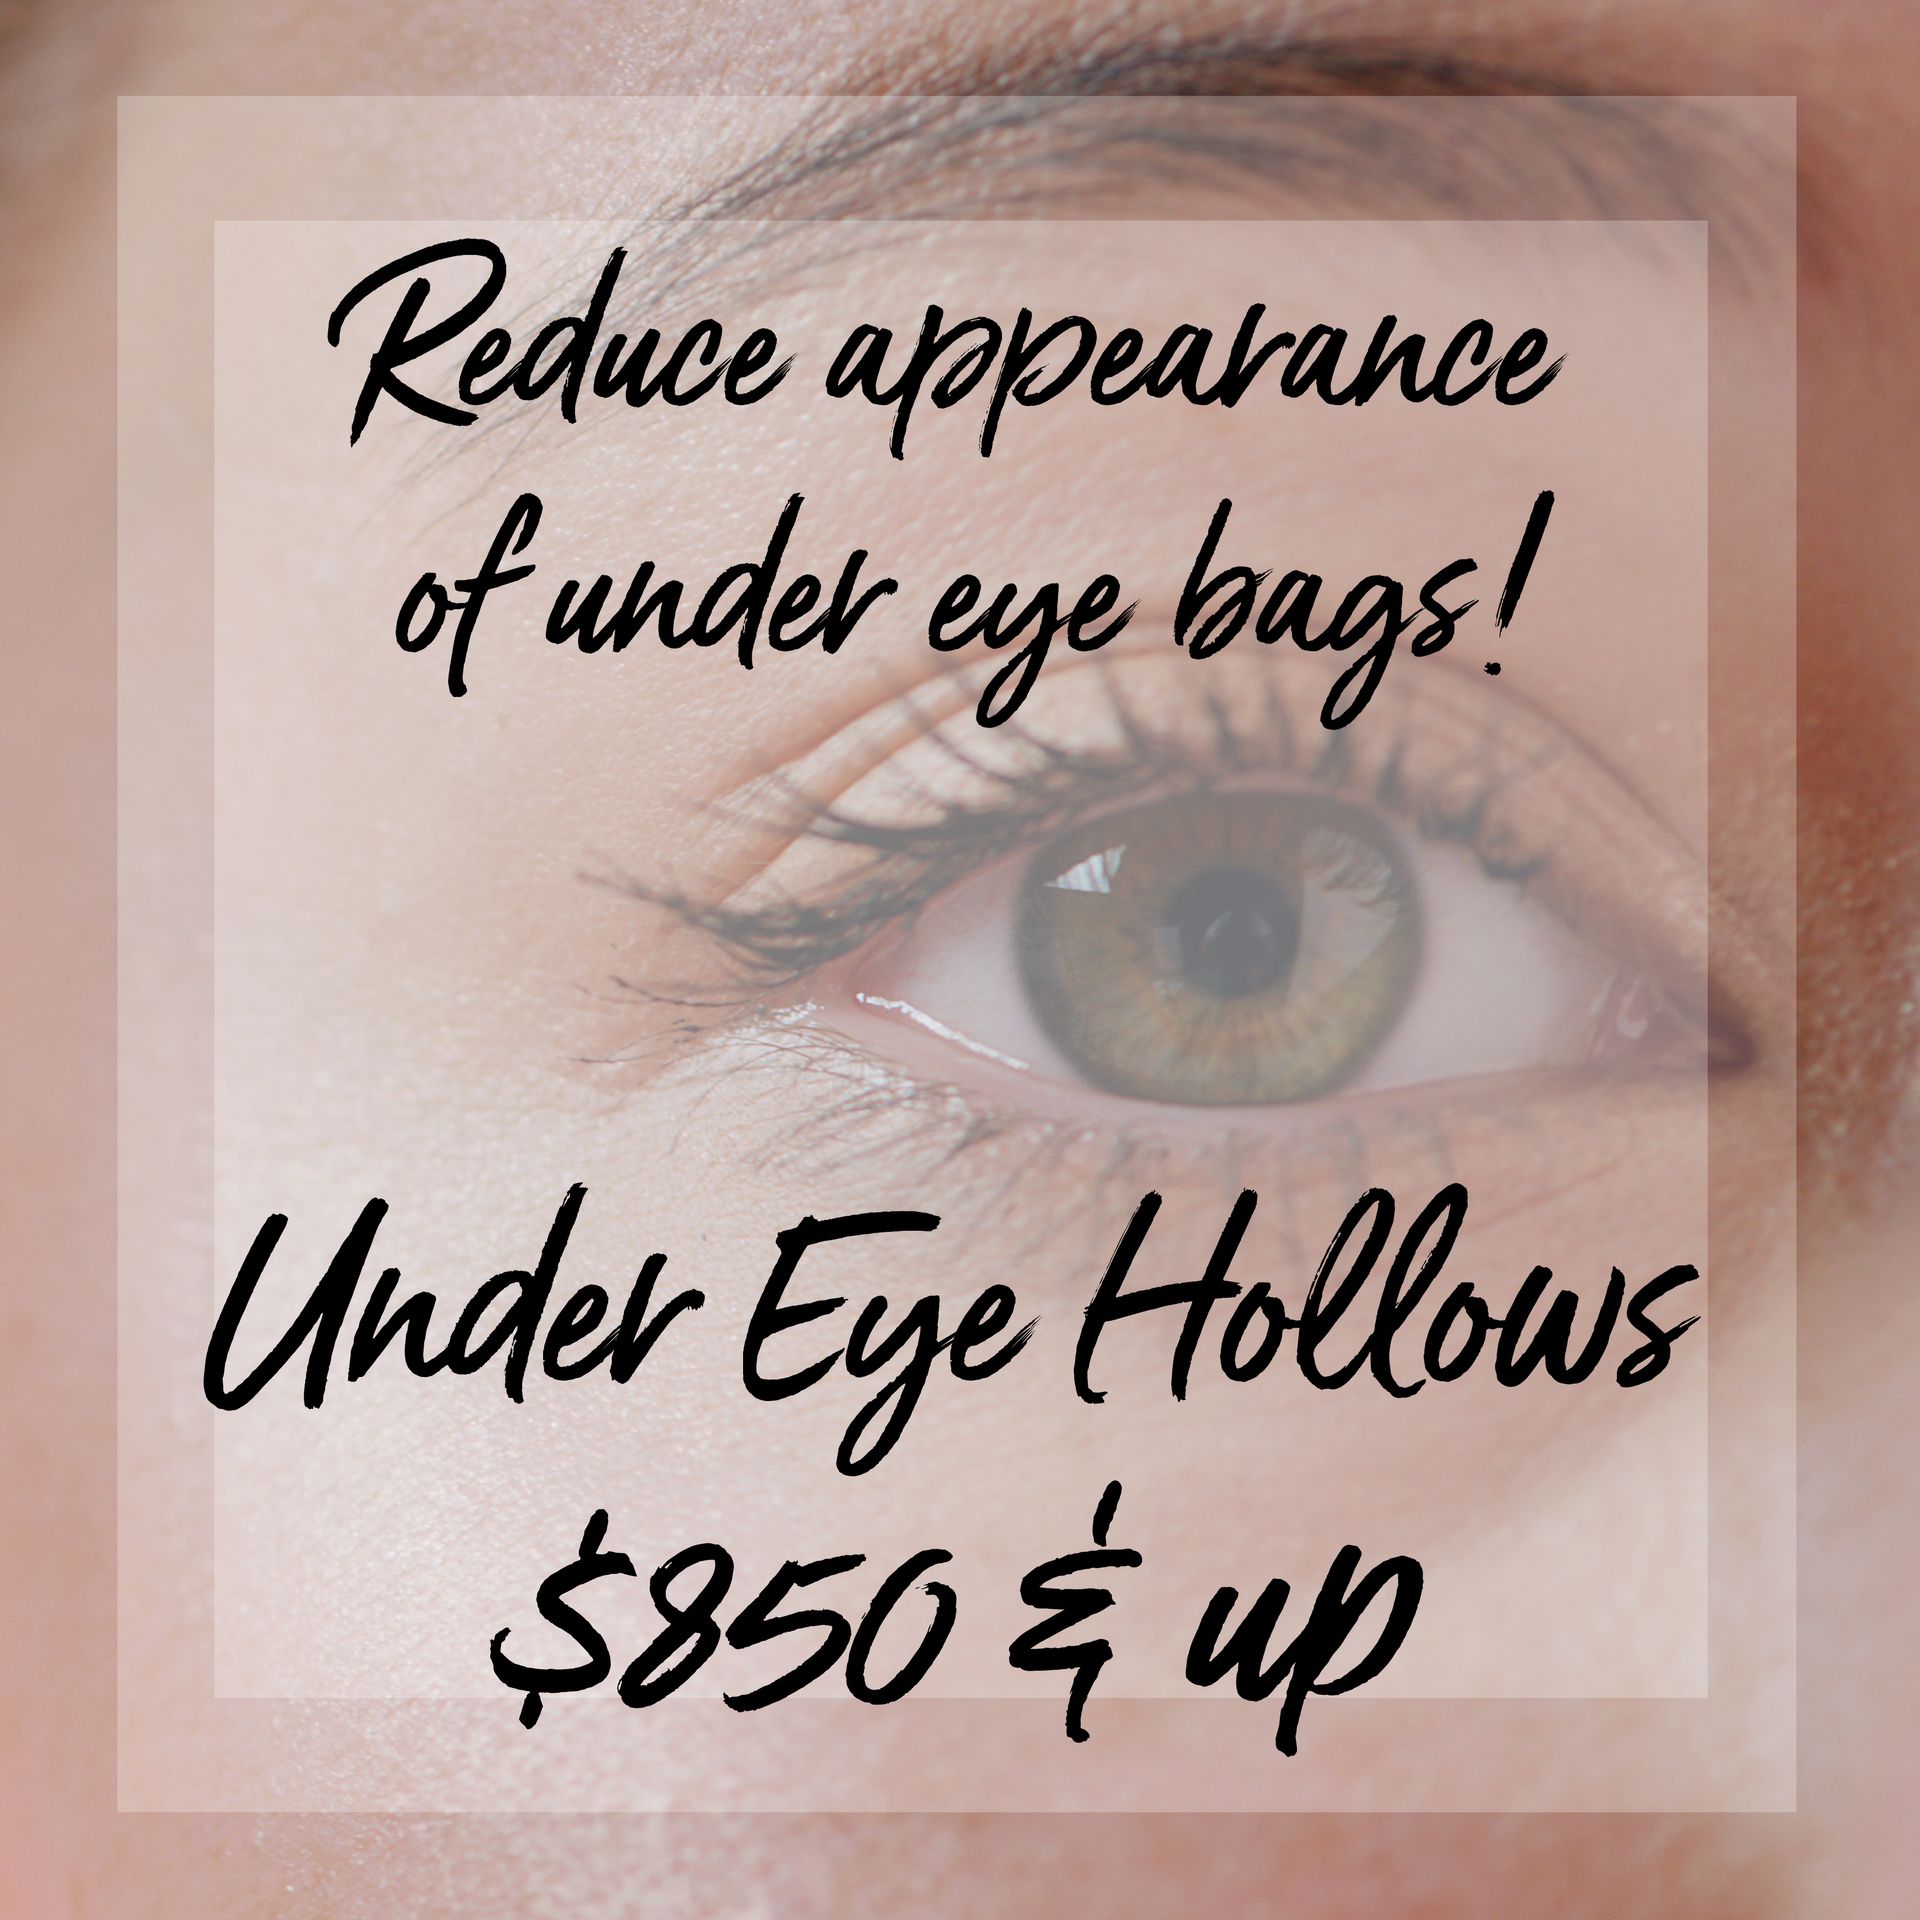 A picture of a woman 's eye with the words reduce appearance of under eye bags under eye hollows $ 850 & up